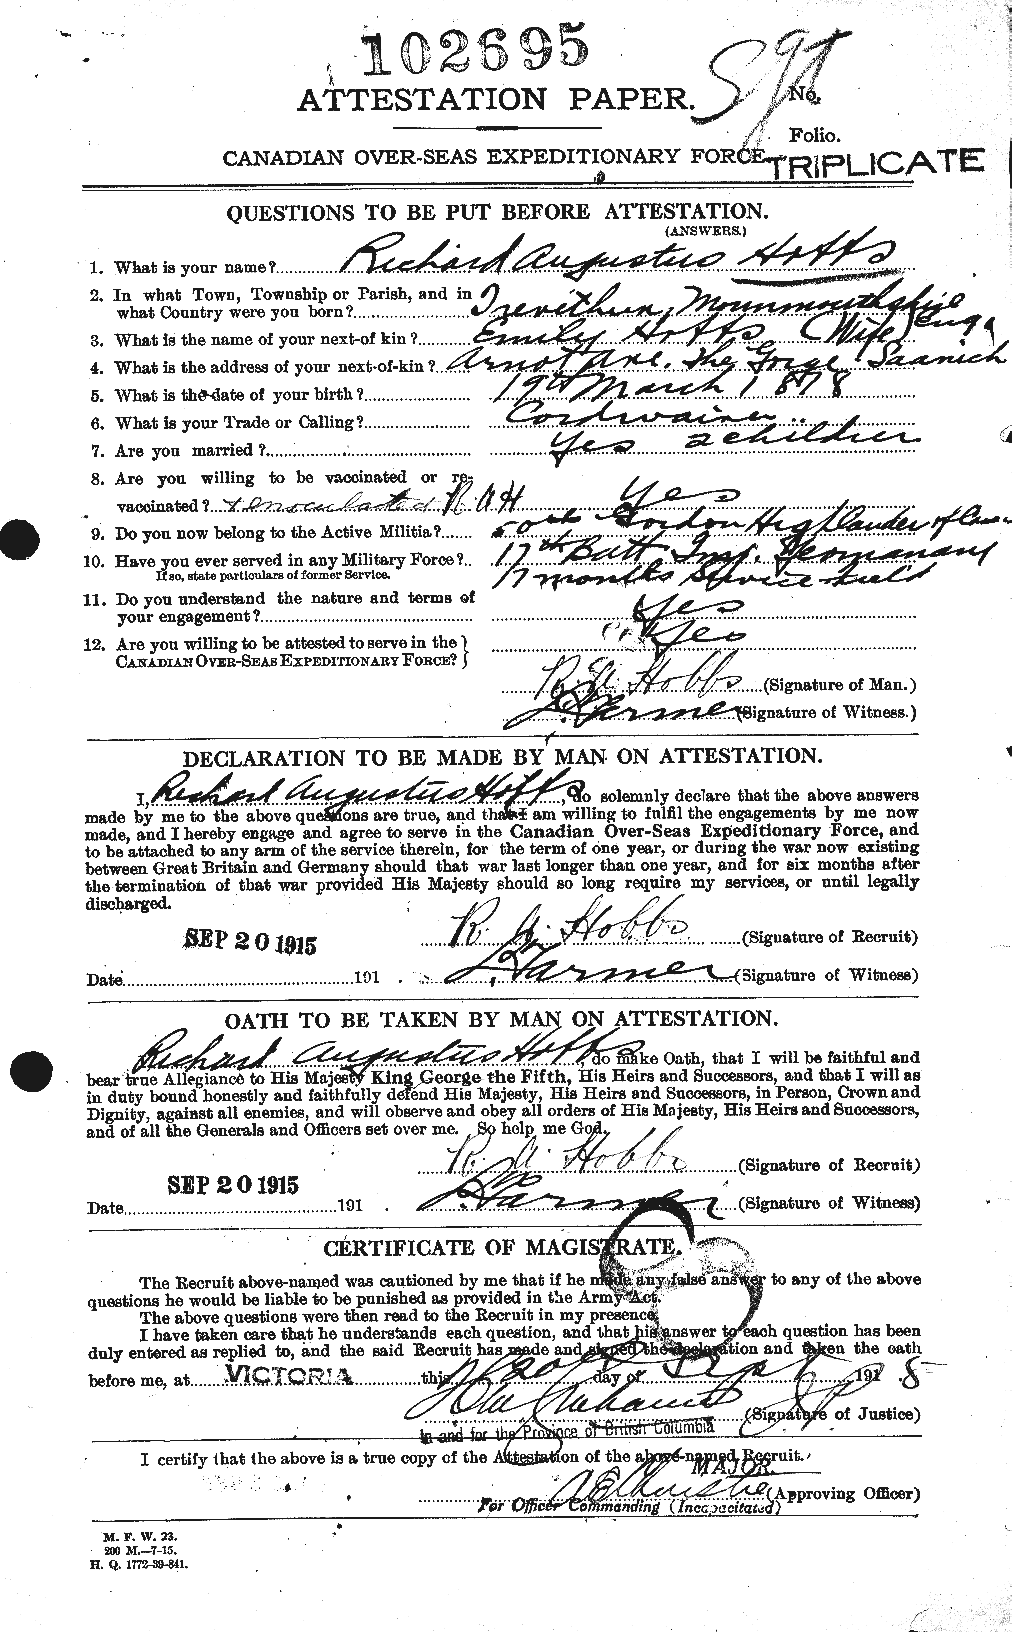 Personnel Records of the First World War - CEF 394996a